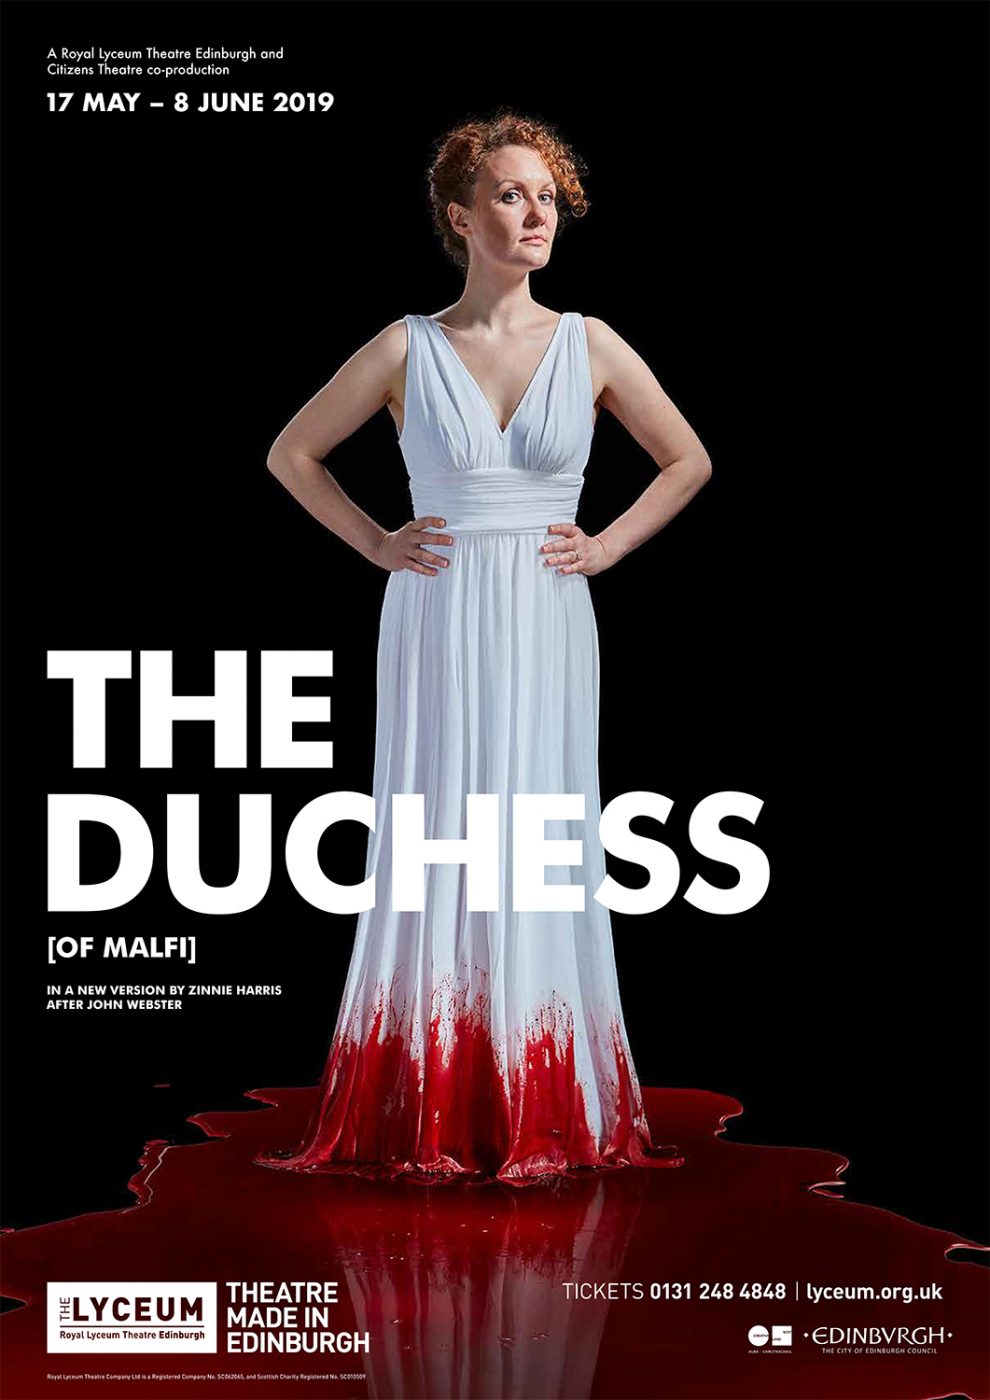 the final poster for The Duchess of Malfi at the Lyceum theatre Edinburgh 